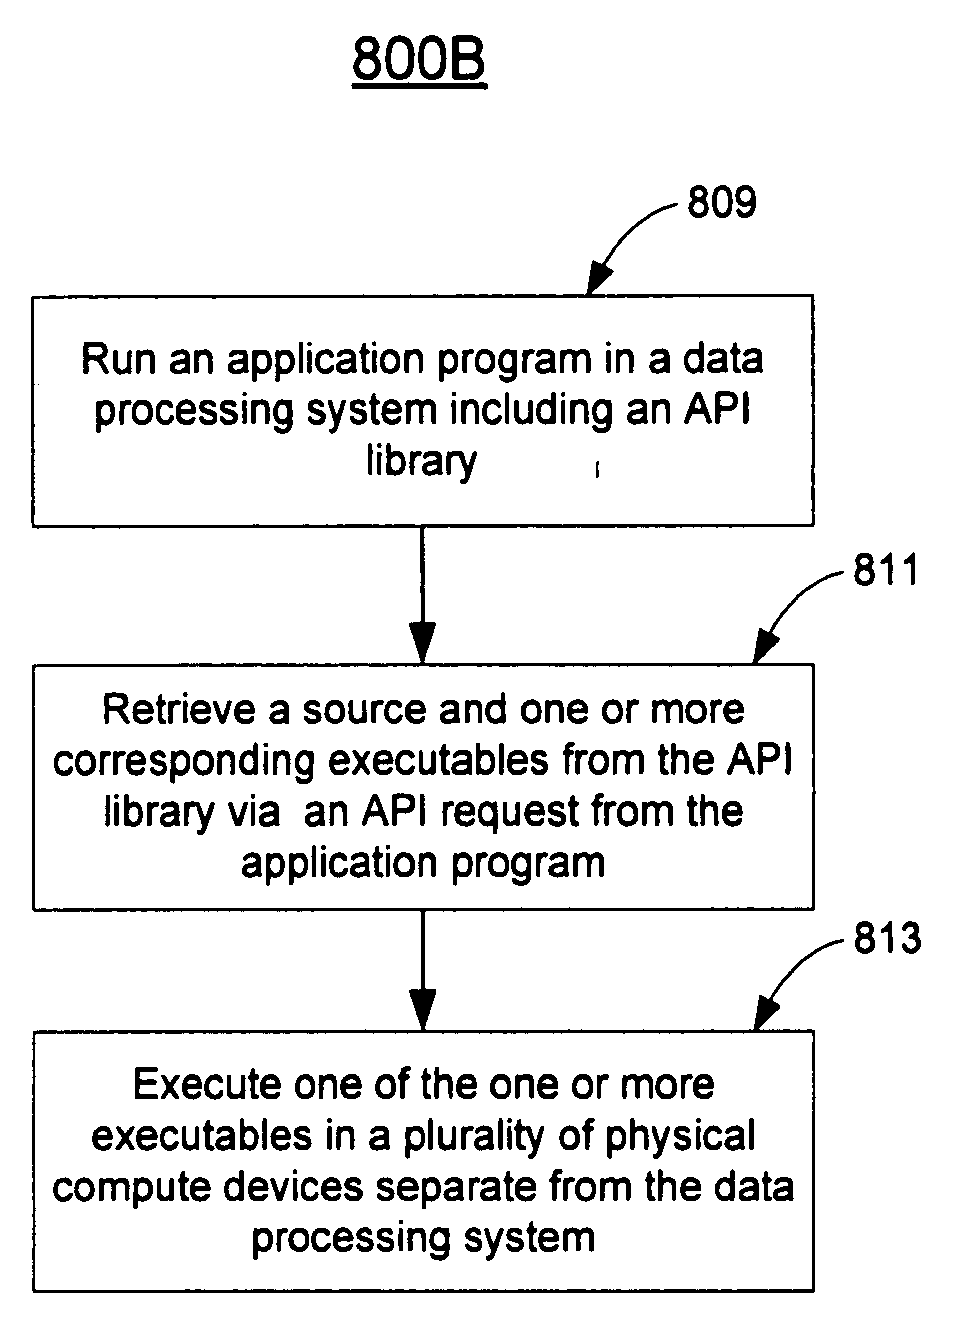 Parallel runtime execution on multiple processors